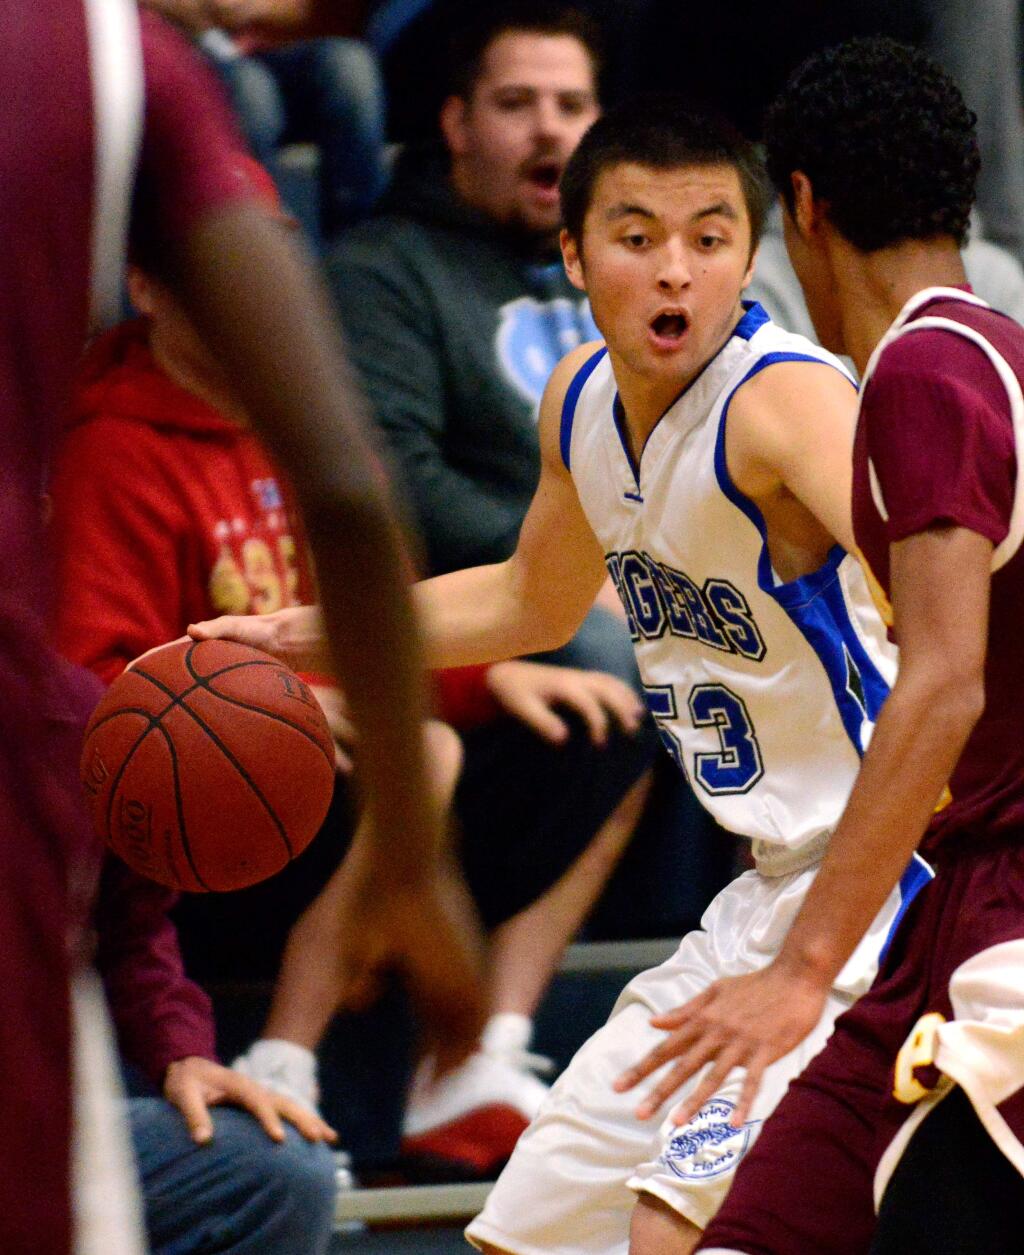 Analy's Nick Fujii (53), seen in this game in Feb. 2014, scored a game-high 18 points to lead Analy past Ukiah 66-52 on Tuesday, Dec. 1, 2015. (Alvin Jornada / The Press Democrat)